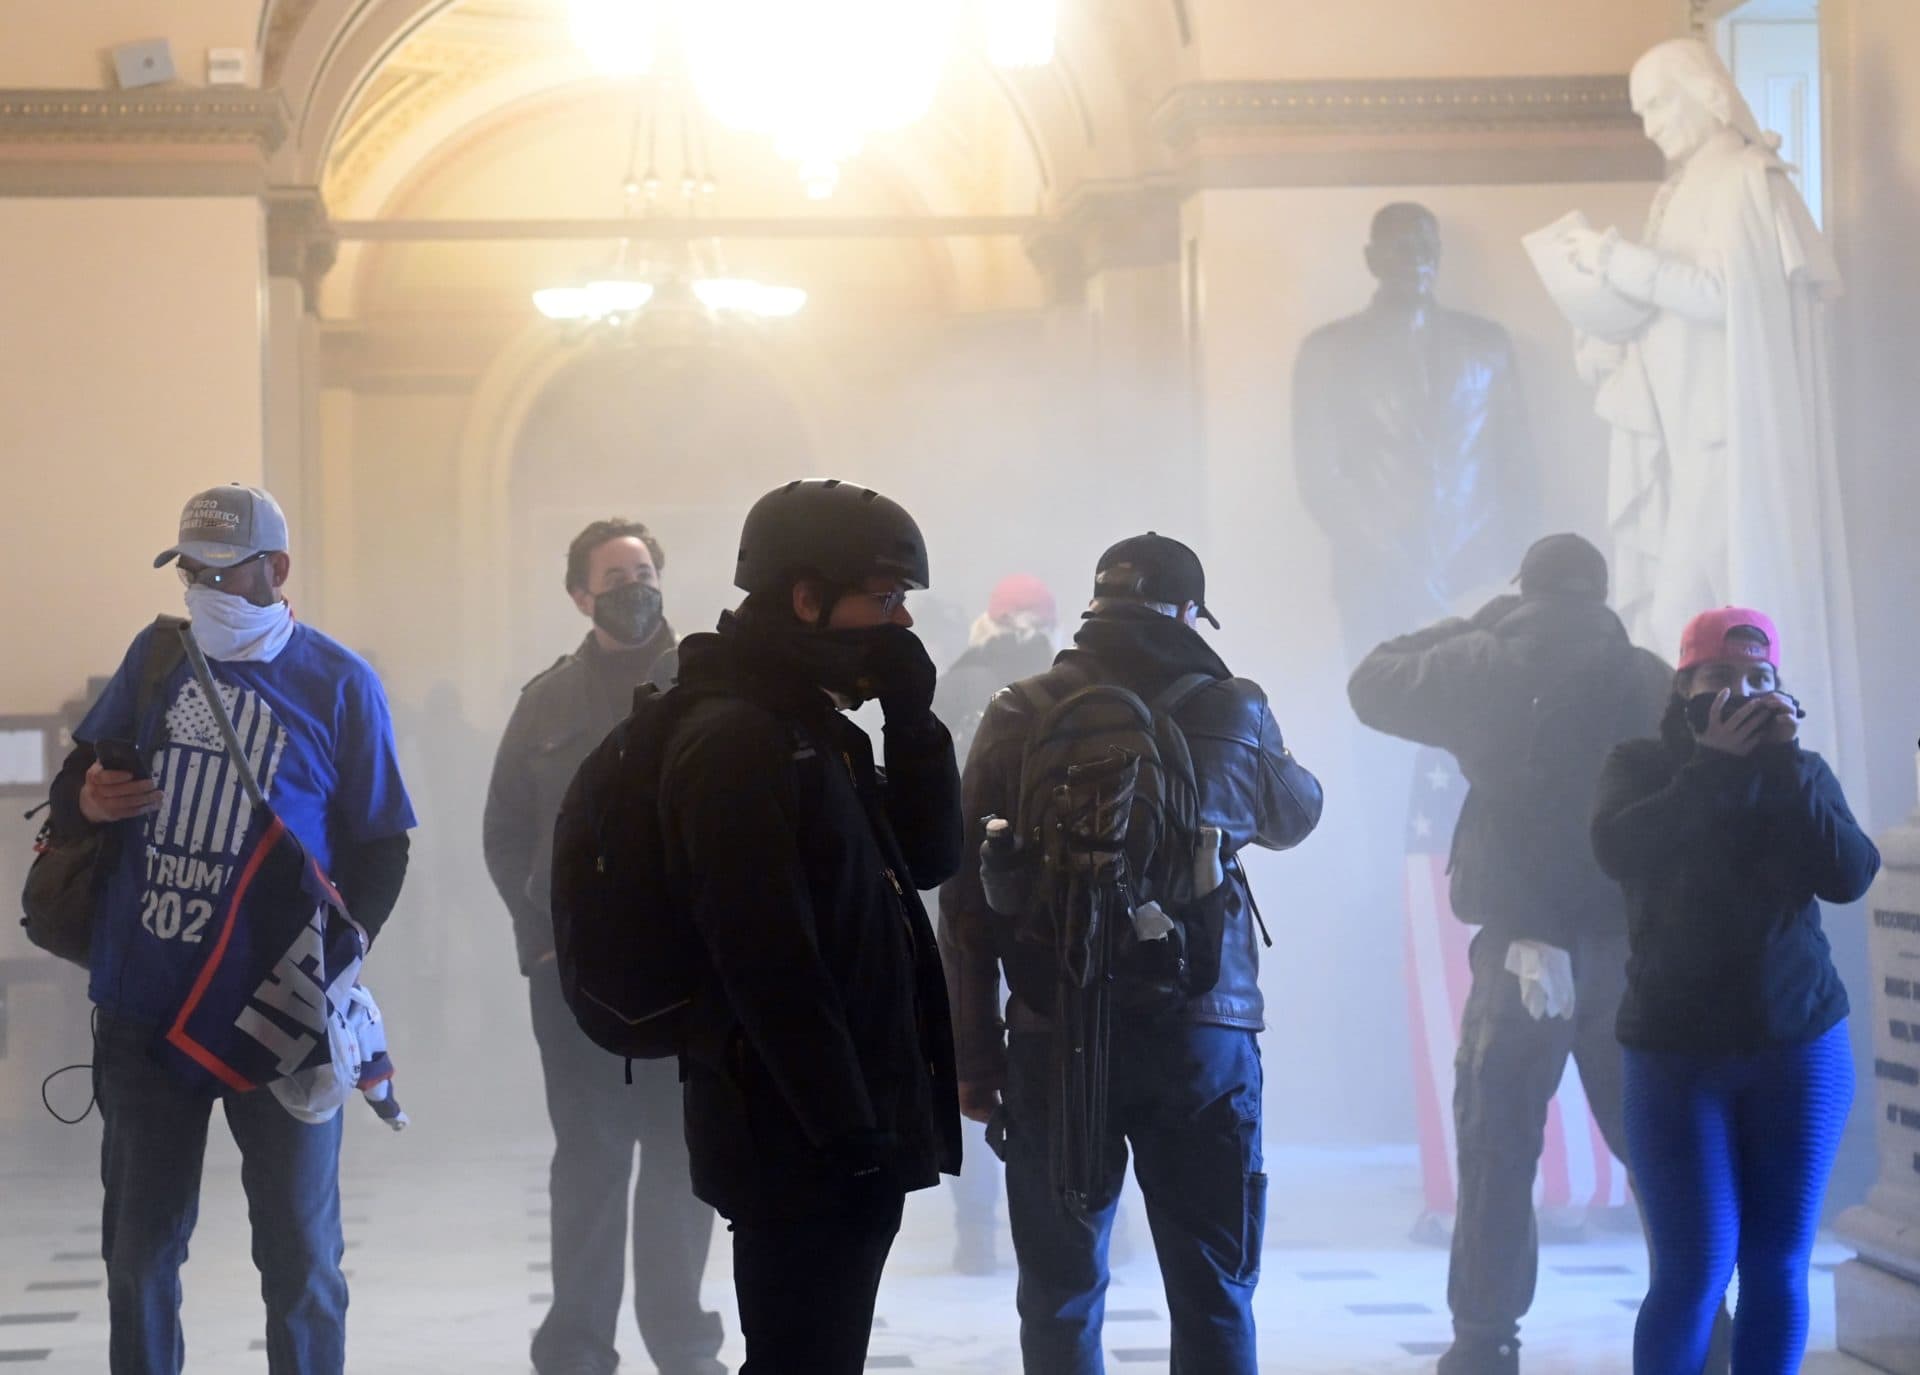 Demonstrators breached security and entered the Capitol. (Saul Loeb/AFP via Getty Images)